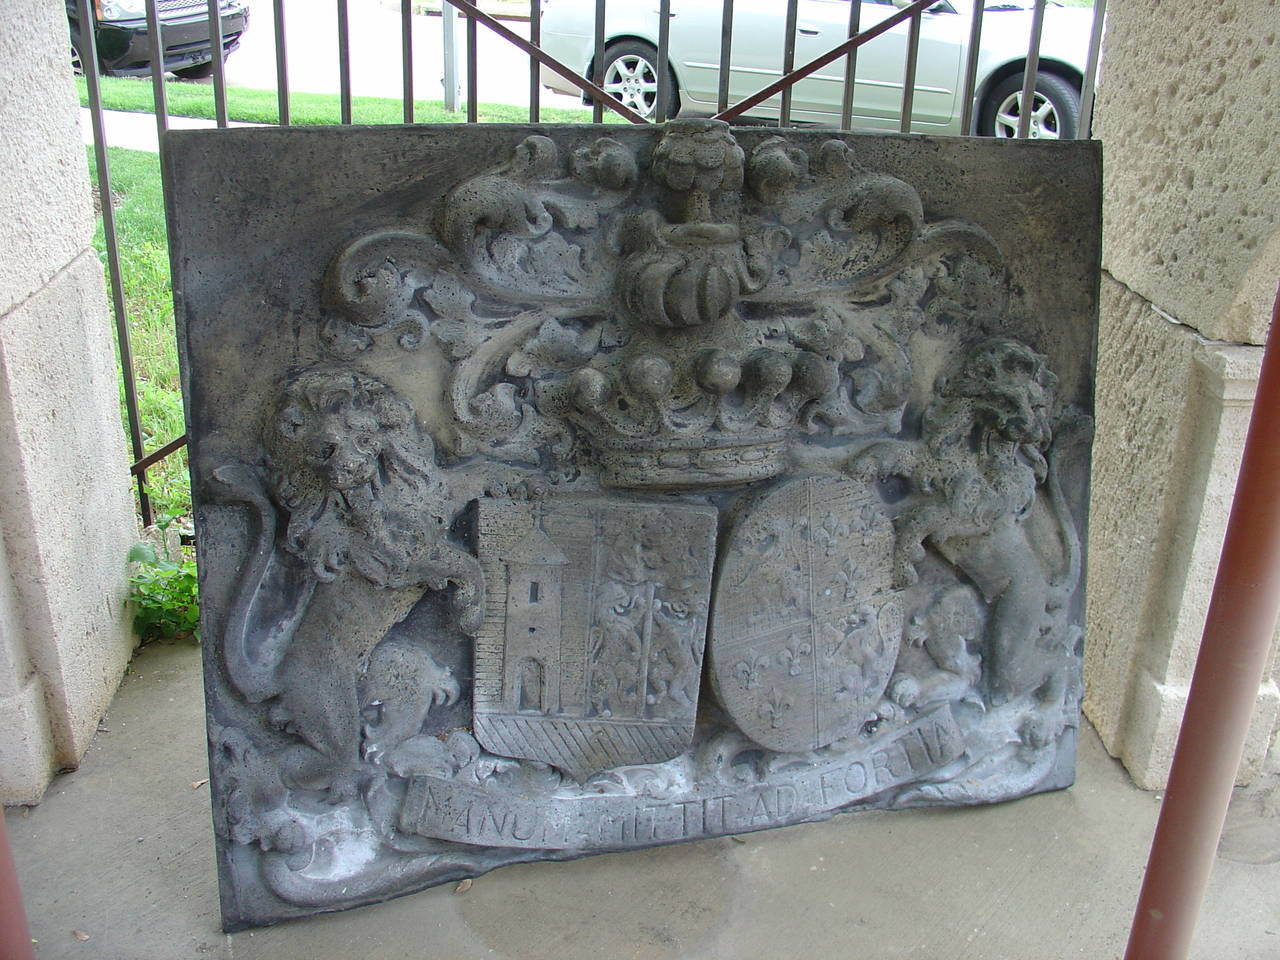 This is casted from an original stone plaque that was a frontage to a Belgian castle. It is likely that this plaque features the Coat of Arms of the family Crawhez, according to the Jean-Baptiste Rietstap, who created one of the worlds largest